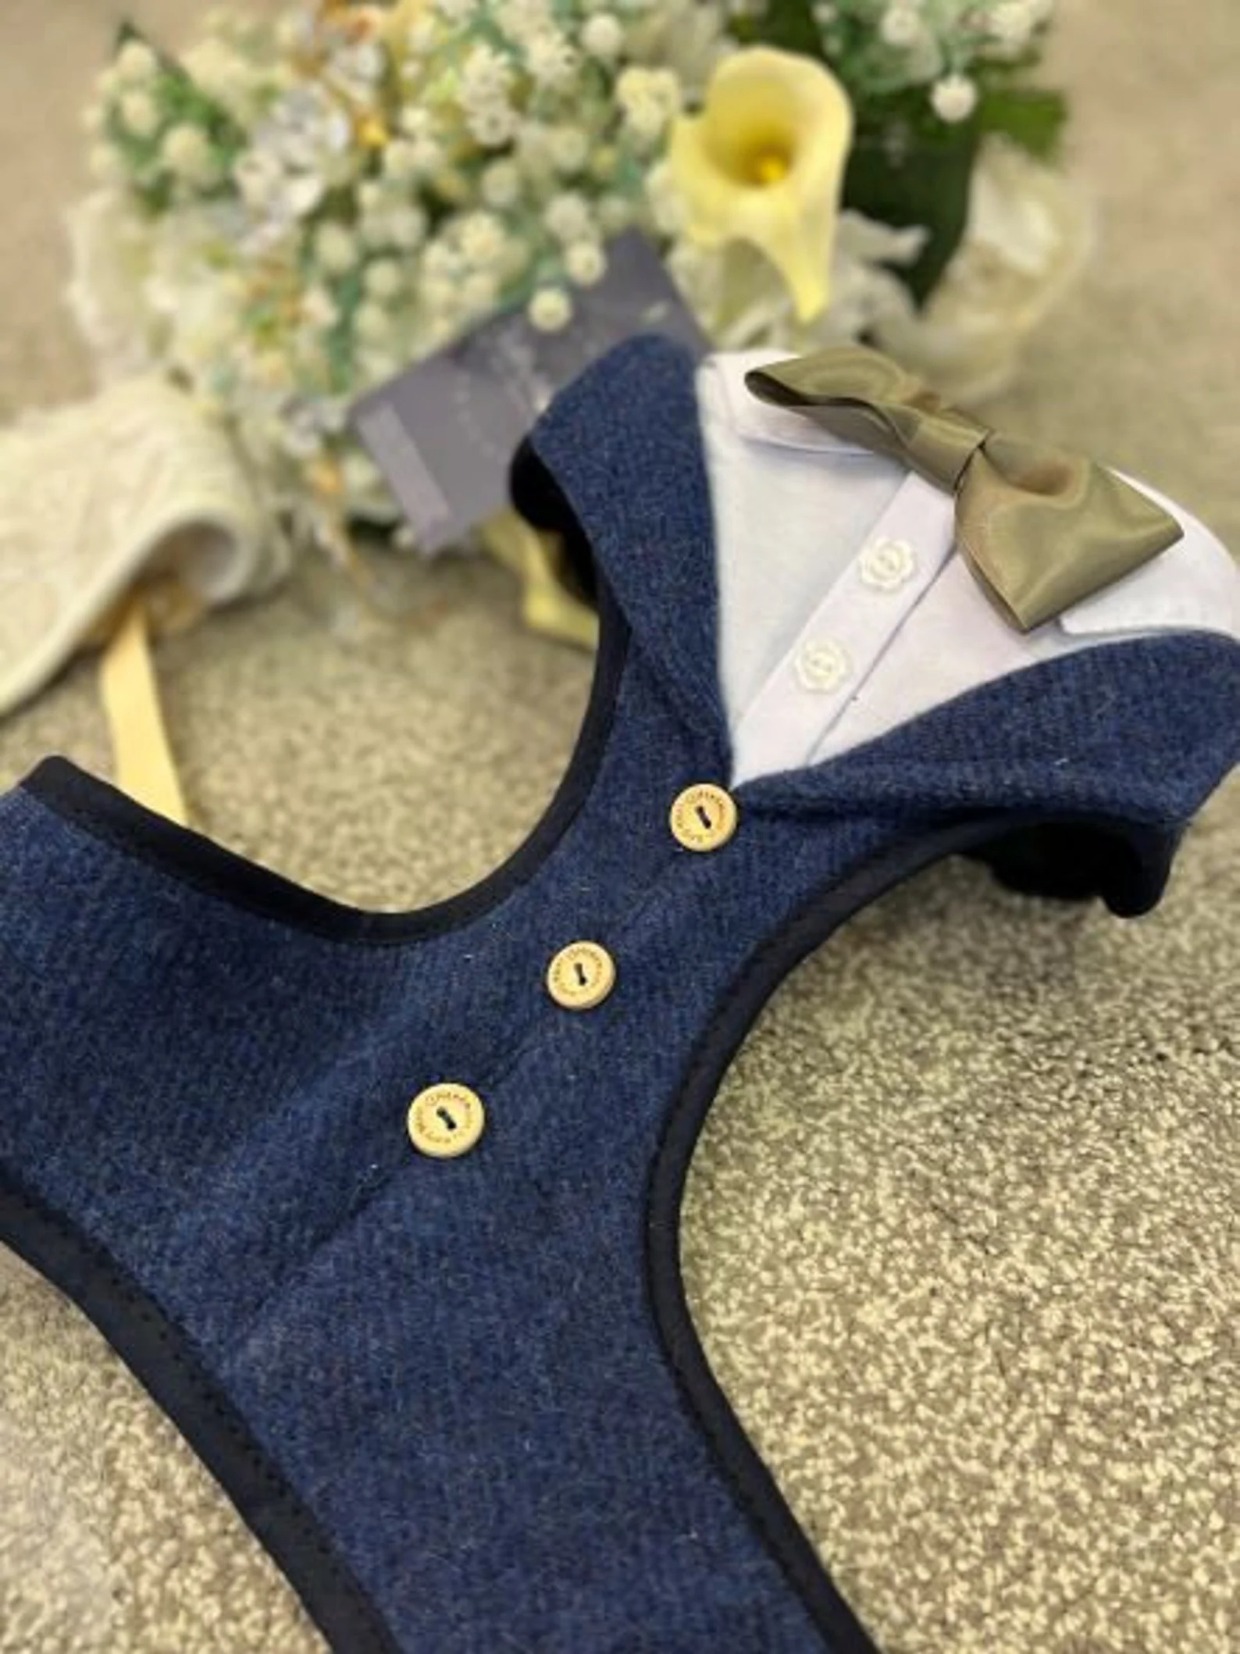 blue dog vest with bowtie for wedding